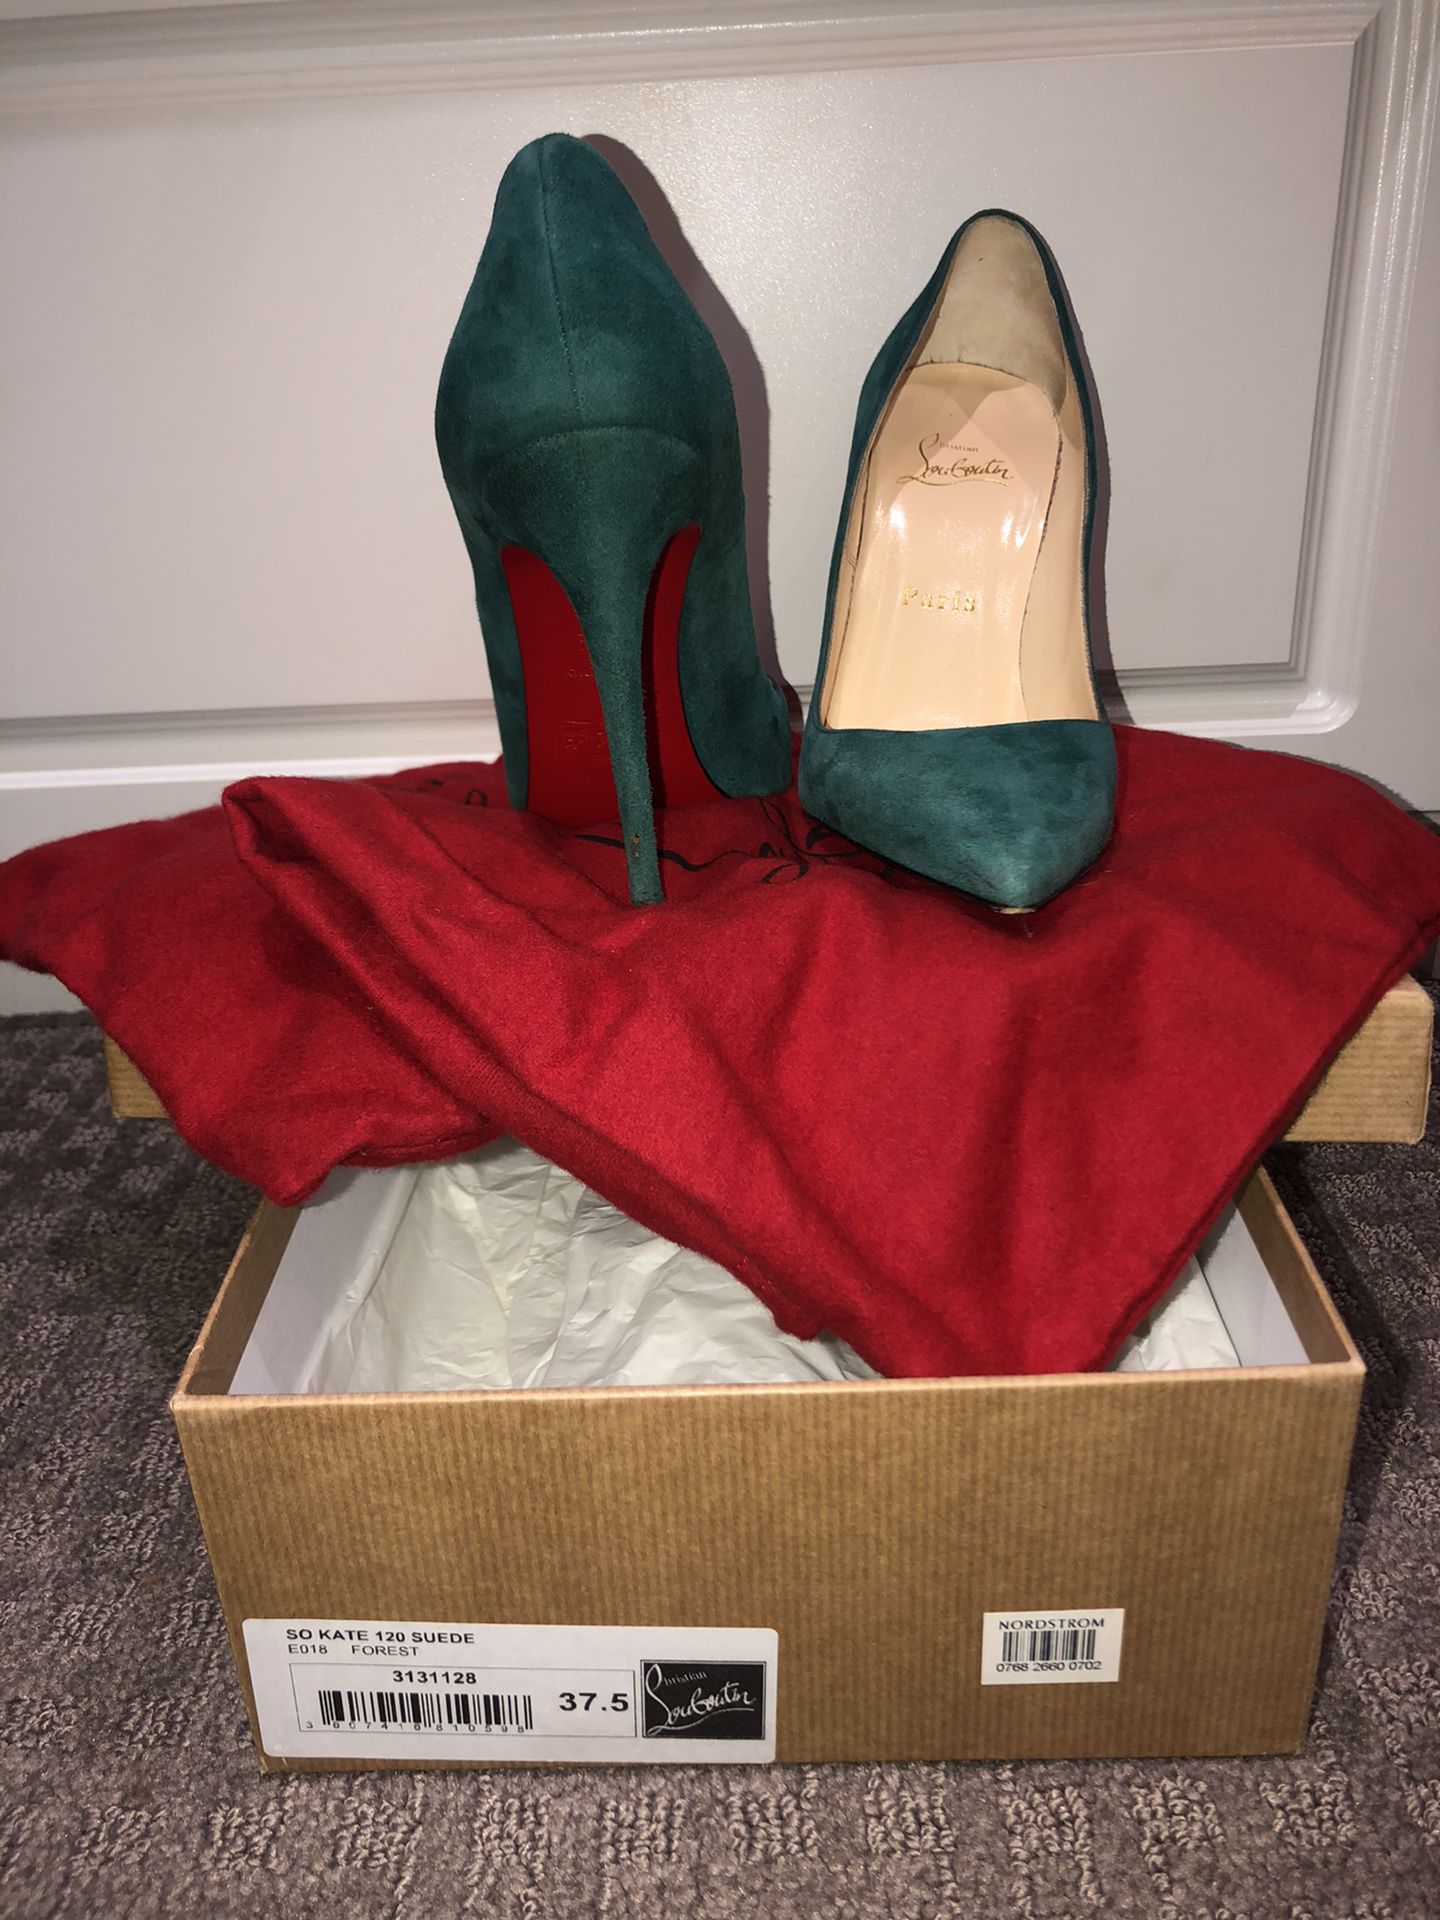 New In The Box Christian Louboutin Red Bottom Shoes Euro 43 for Sale in  Pumpkin Center, CA - OfferUp